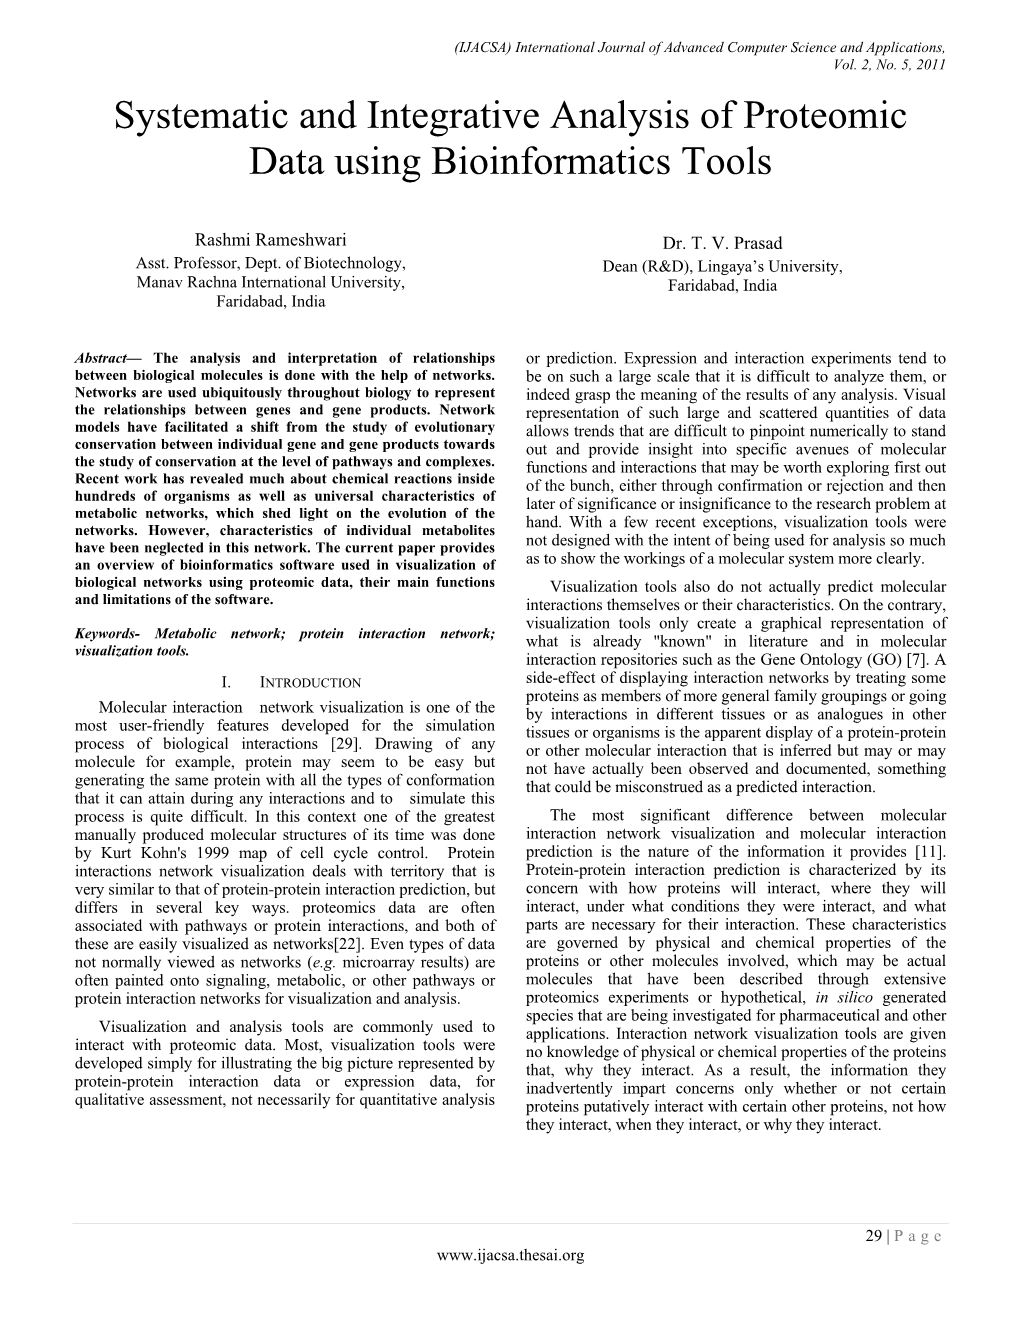 Systematic and Integrative Analysis of Proteomic Data Using Bioinformatics Tools